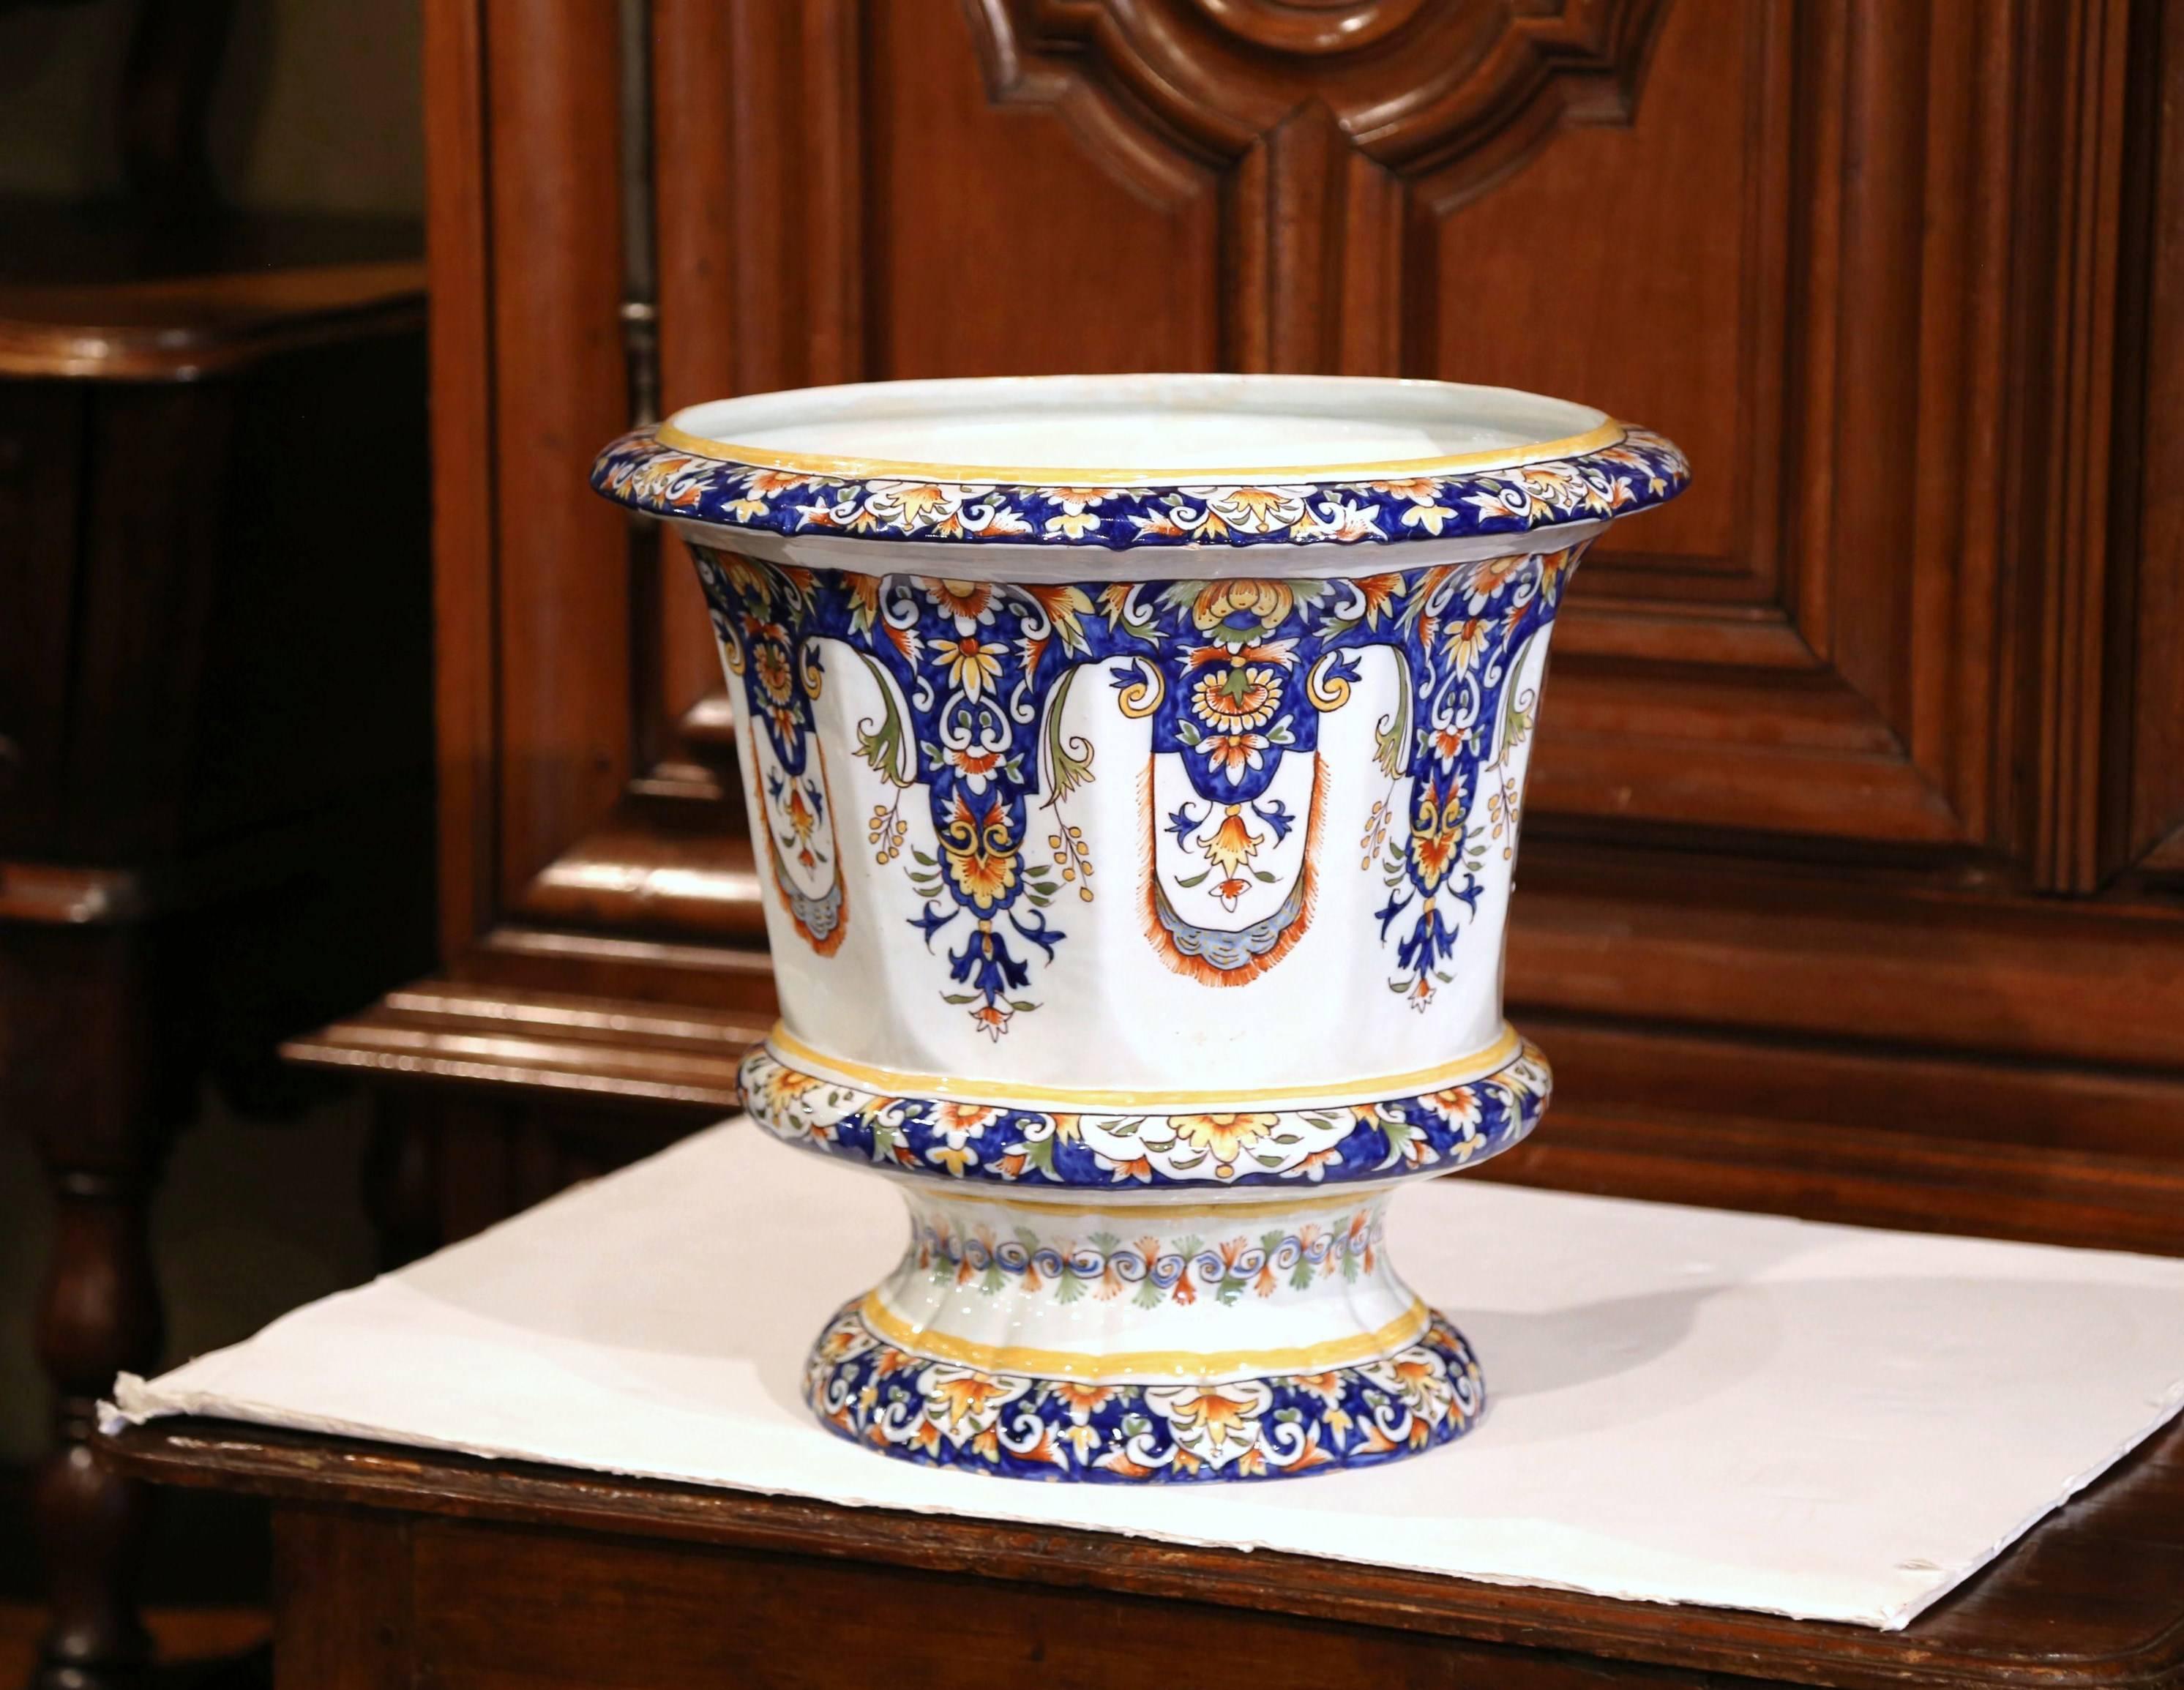 This elegant, large antique ceramic cachepot was crafted in Normandy, France, circa 1920. Signed on the bottom Rouen, the Classic, colorful planter features hand painted decorative floral and leaf motifs in a blue, orange, white and yellow palette.